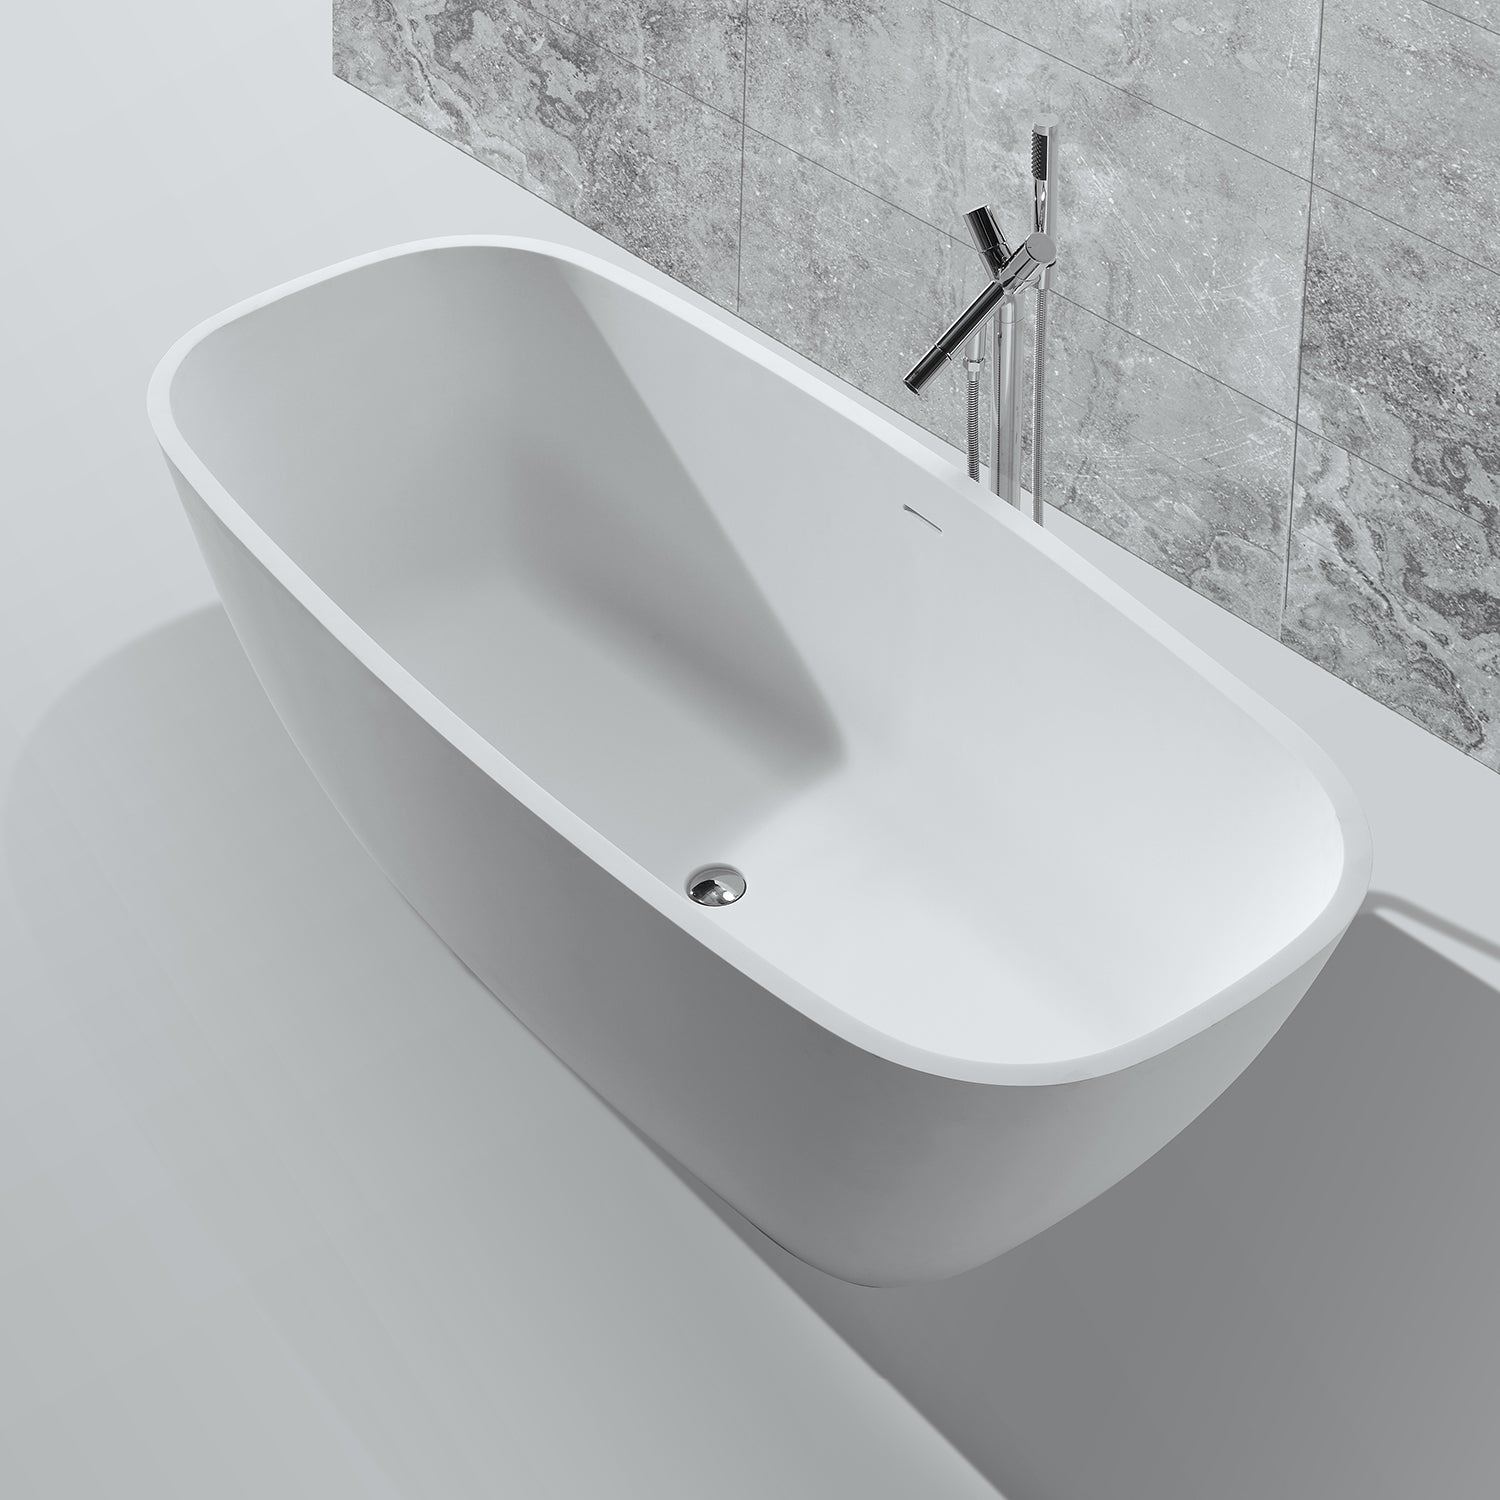 DAX Oval Freestanding Matte Solid Surface Bathtub with Central Drain and Overflow, Fiberglass Reinforcement, Full Immersion, Stainless Steel Frame, 67-3/4 x 21-5/8 x 28-3/4 Inches (BT-AB-B037)